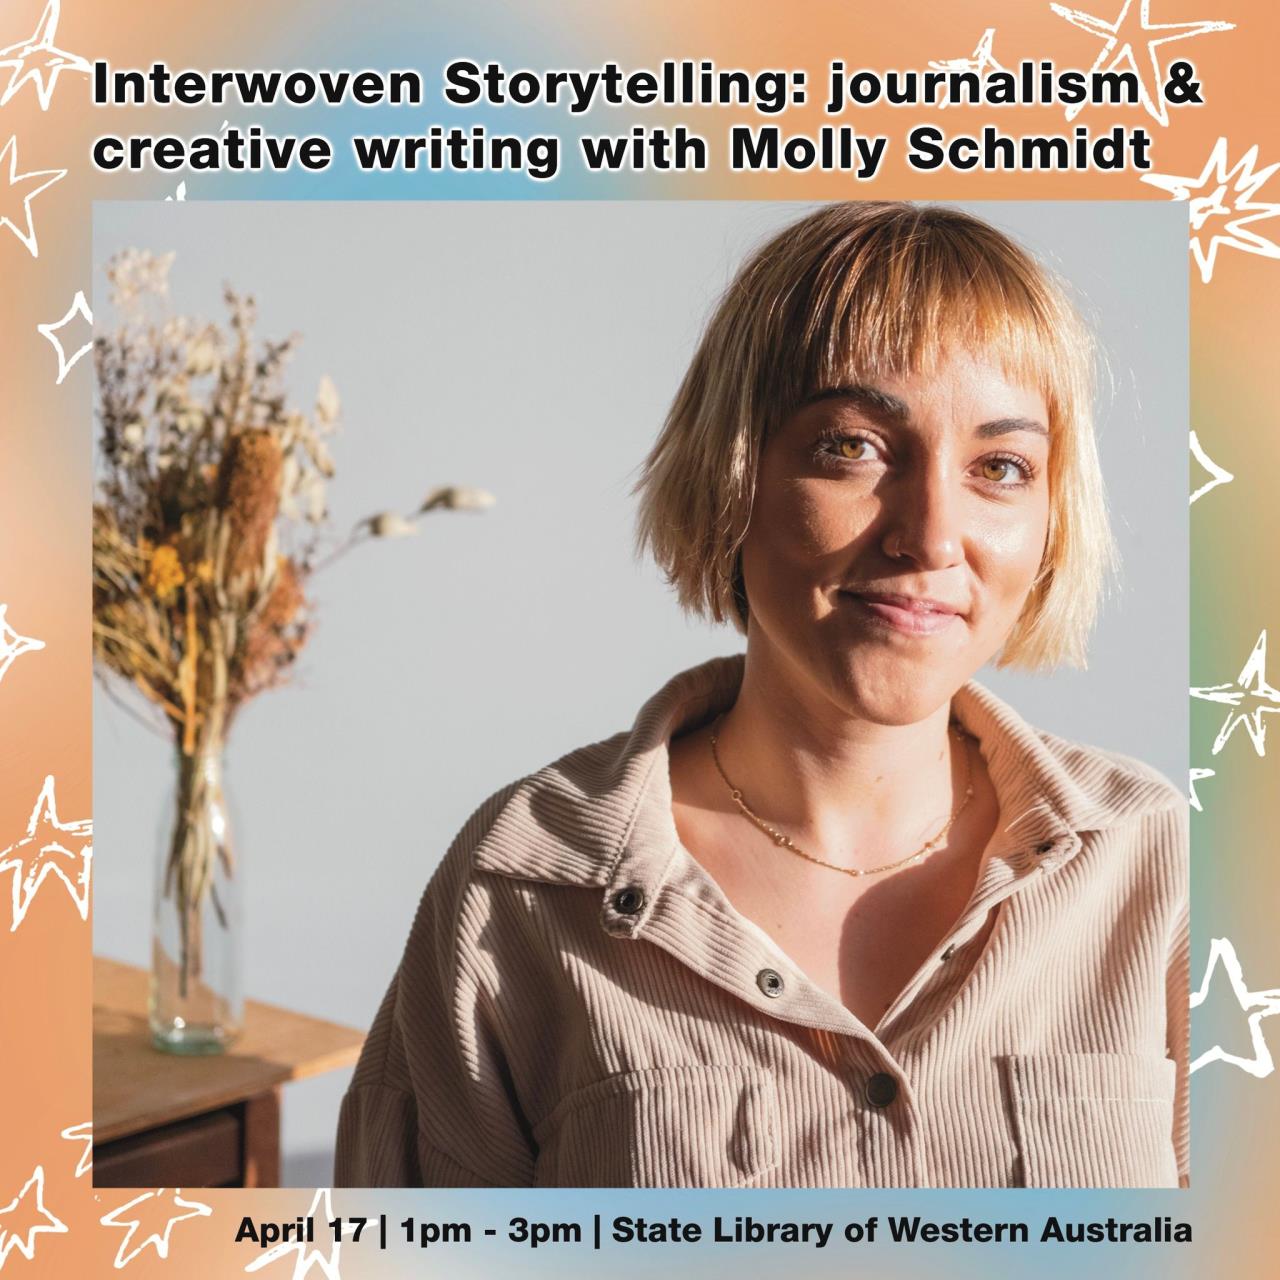 Interwoven storytelling: journalism & creative writing with Molly Schmidt